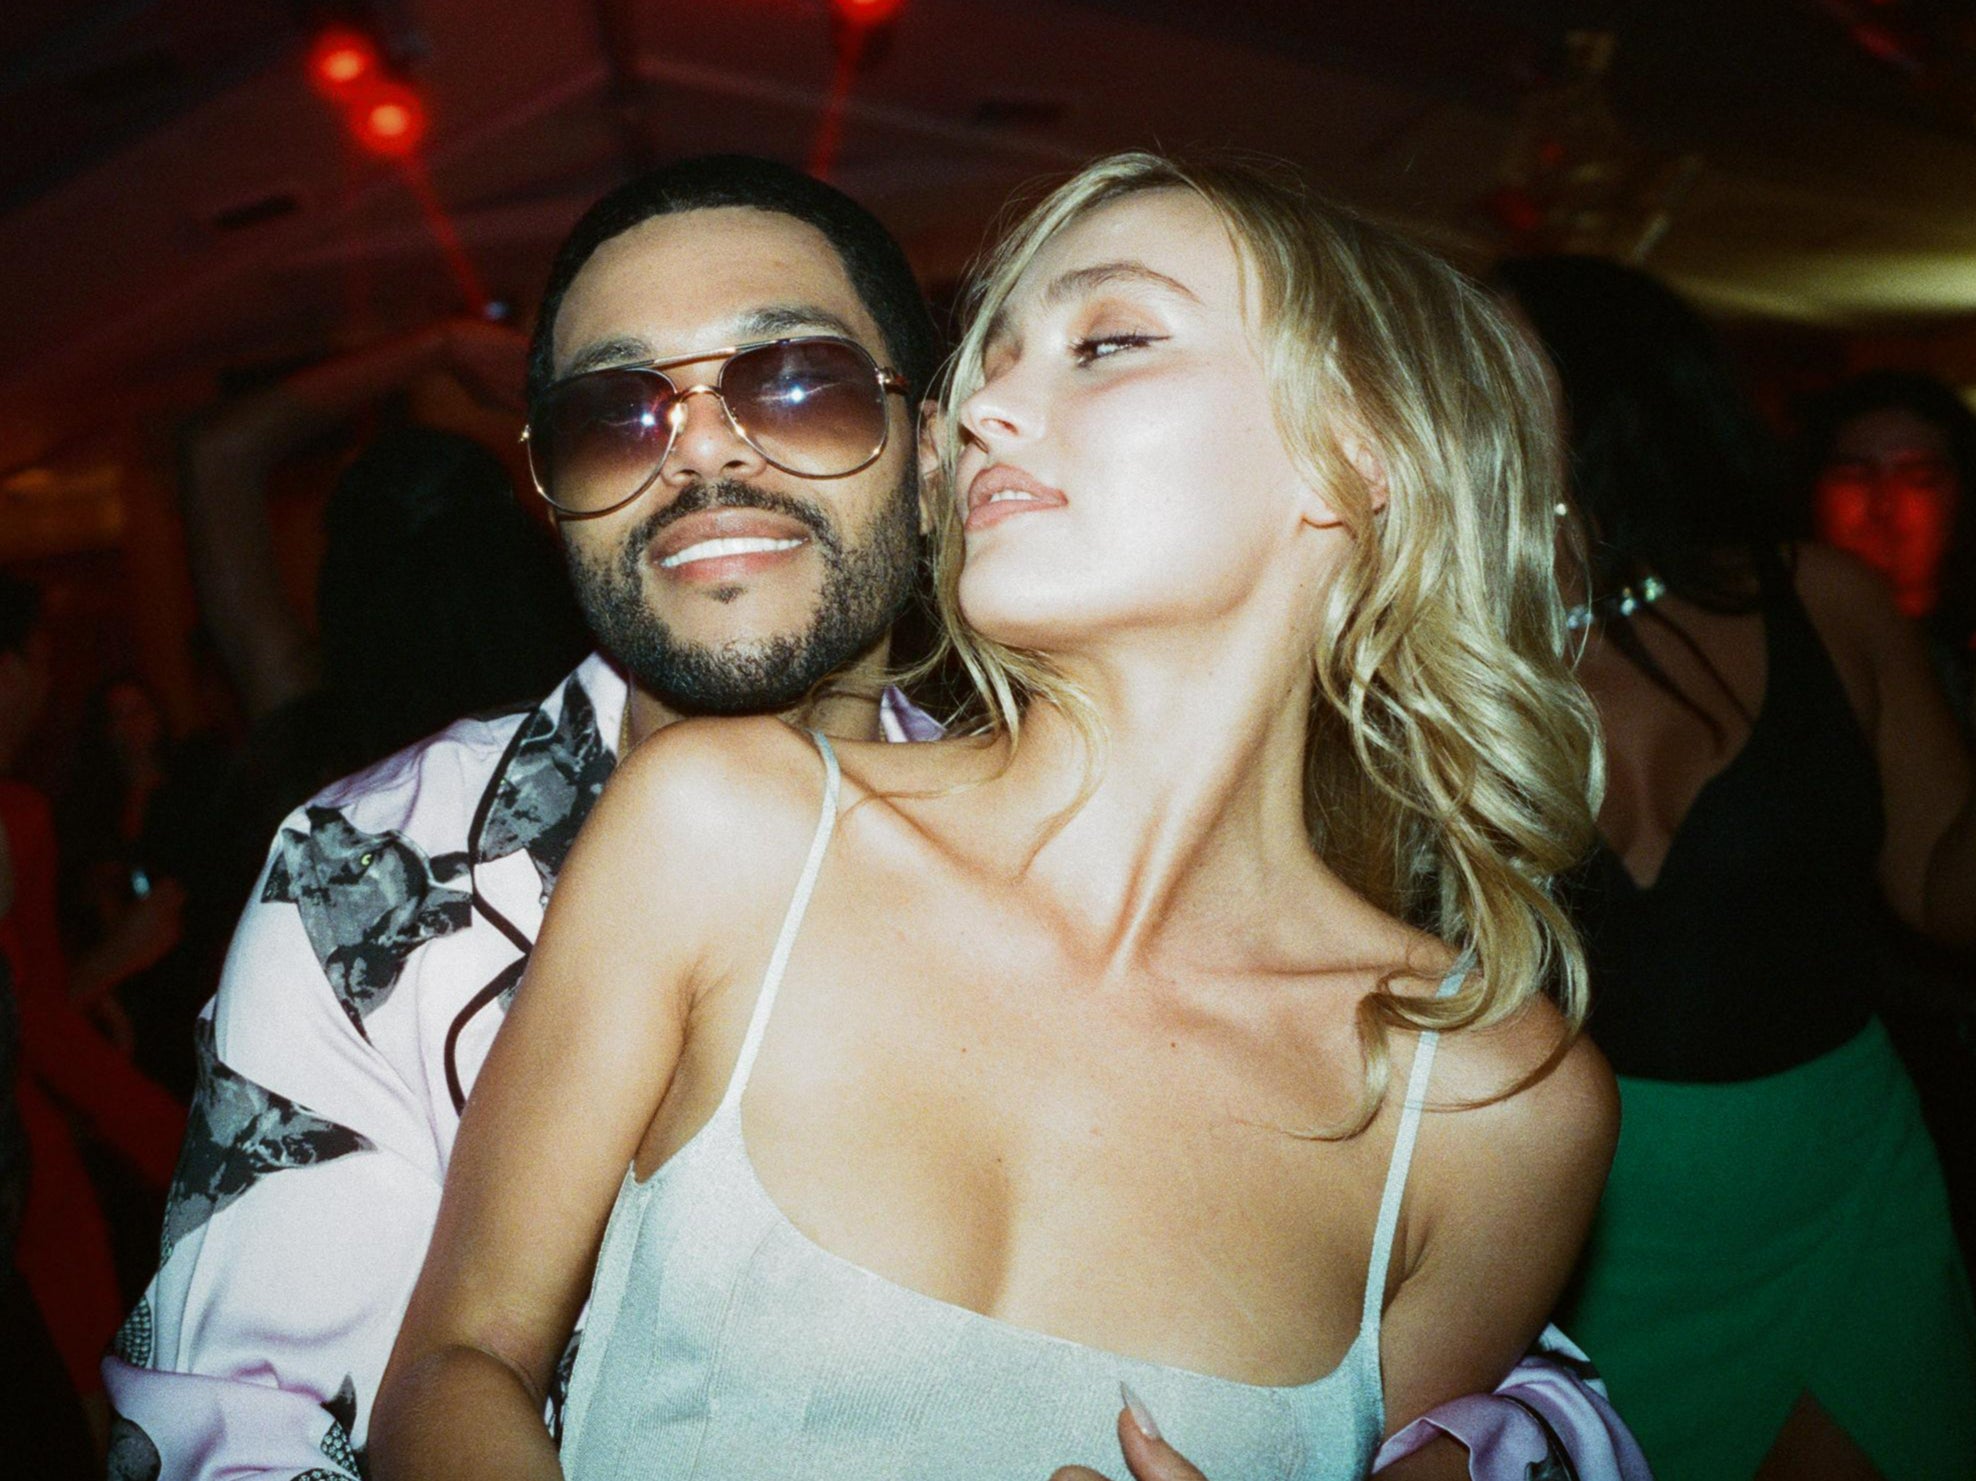 Abel Tesfaye (The Weeknd) and Lily-Rose Depp